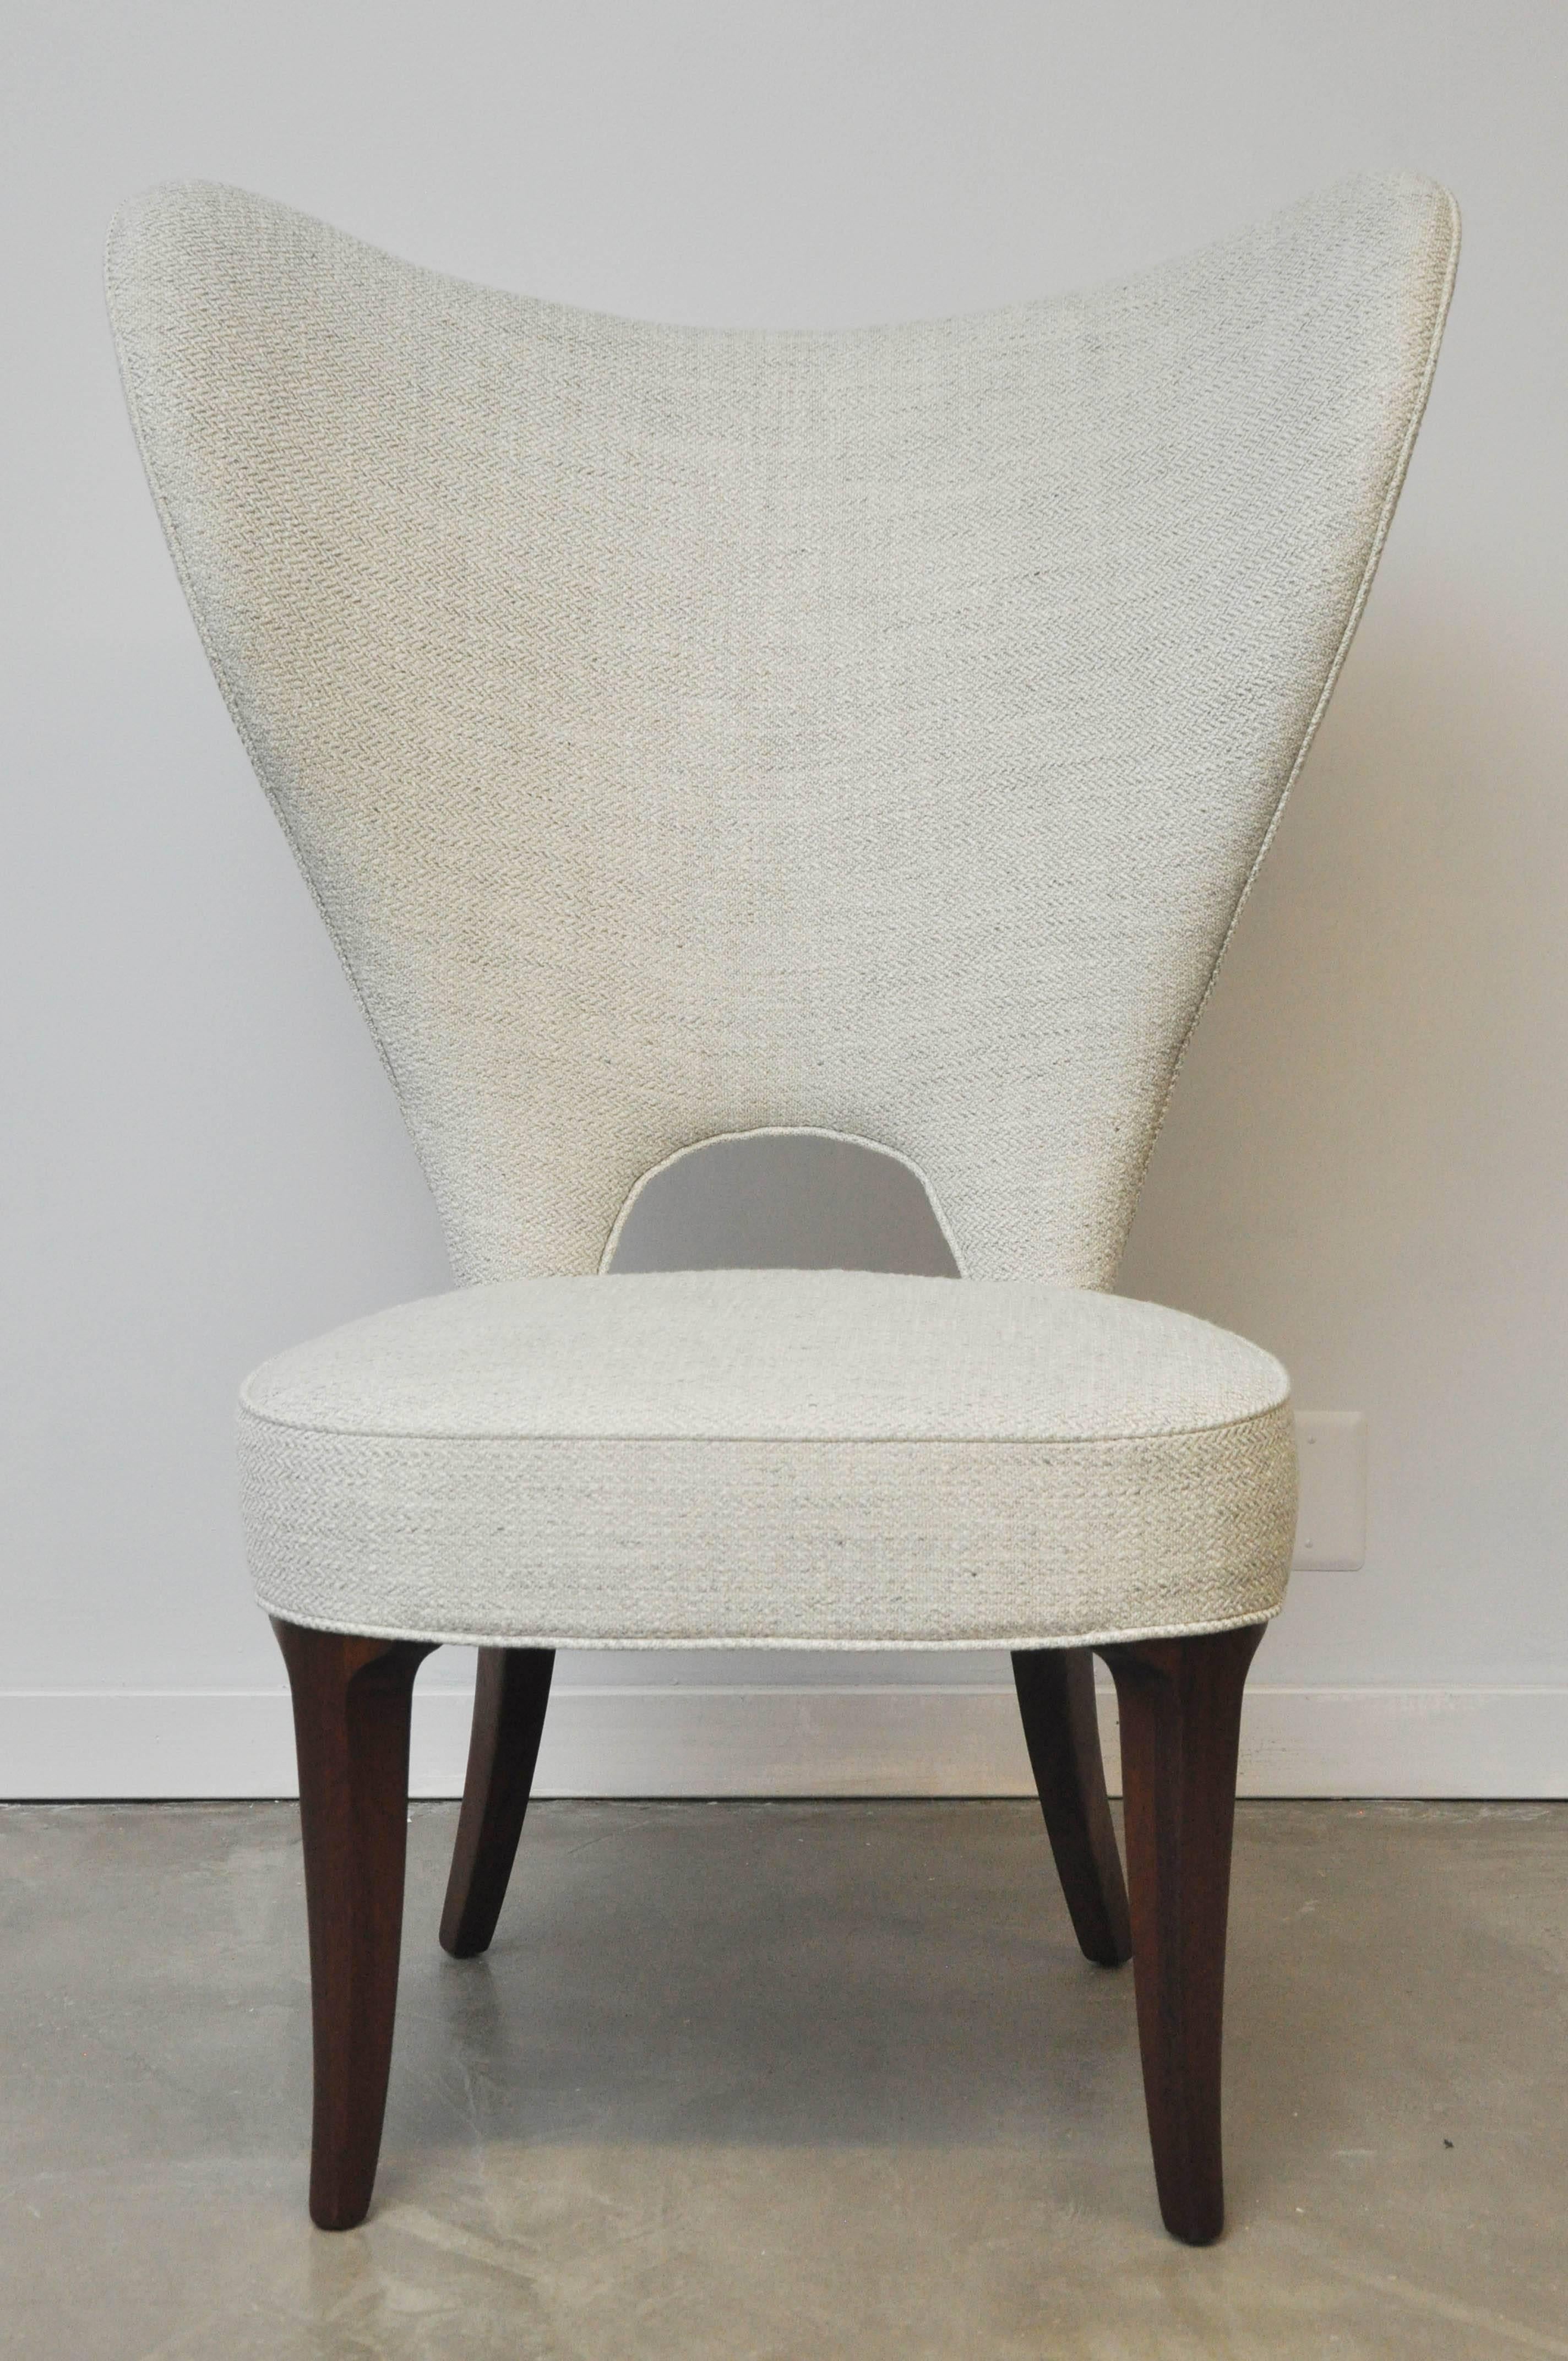 Very rare design by Edward Wormley for Dunbar. Oversized proportions. Fully restored and reupholstered.